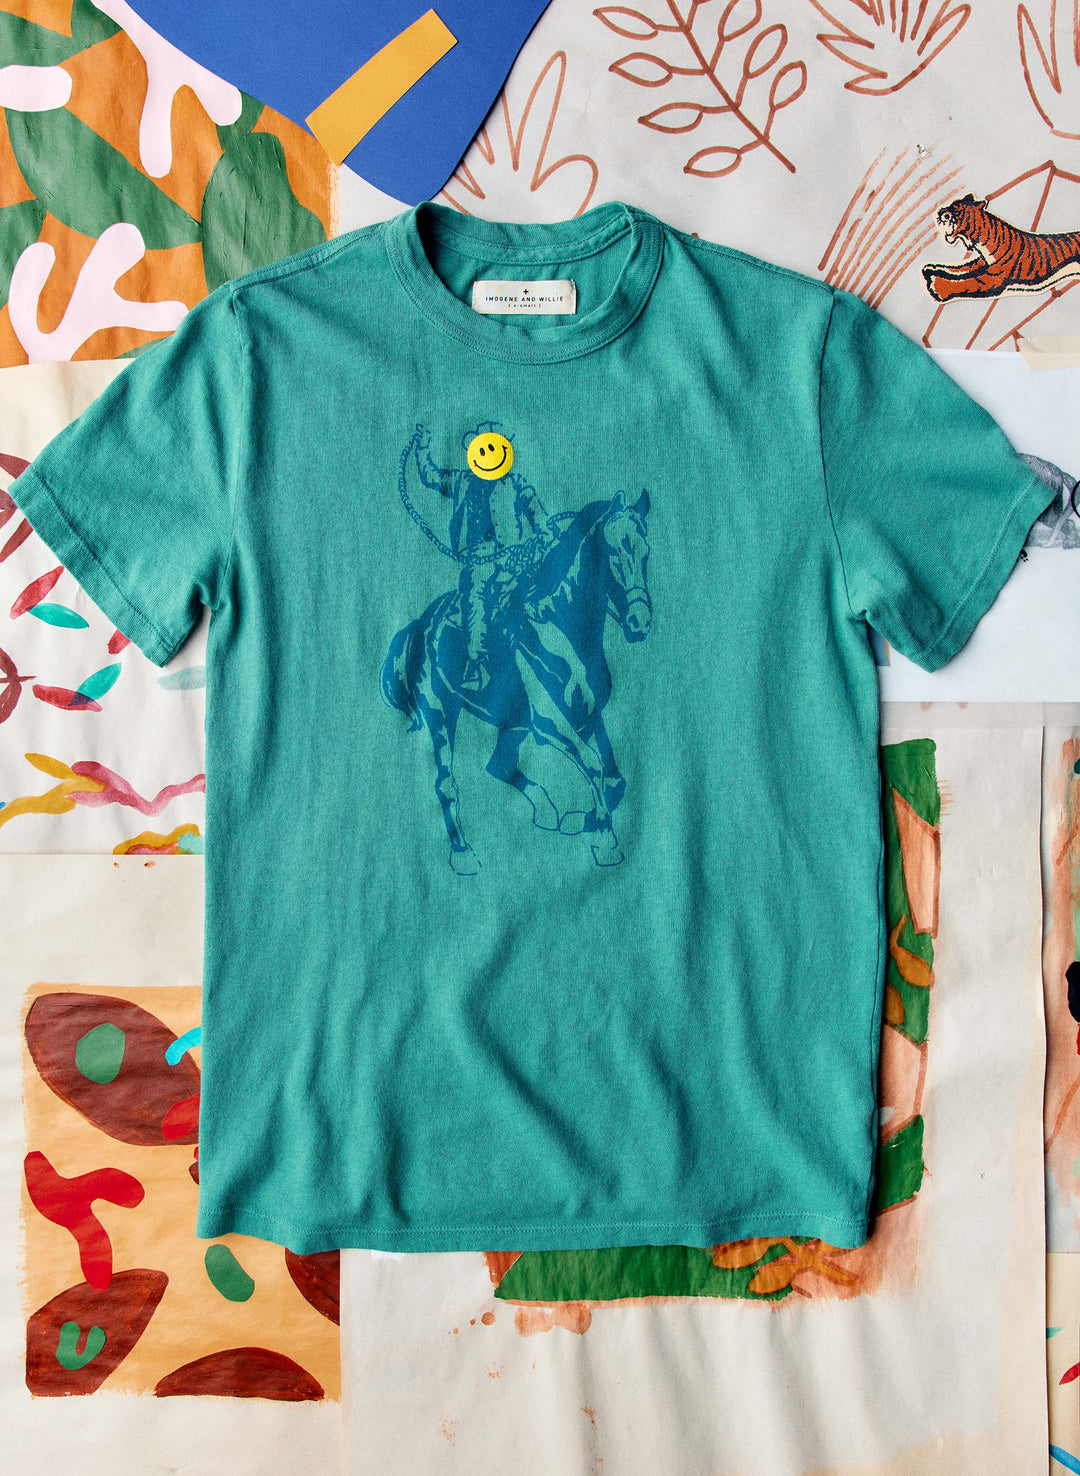 a blue shirt with a horse on it